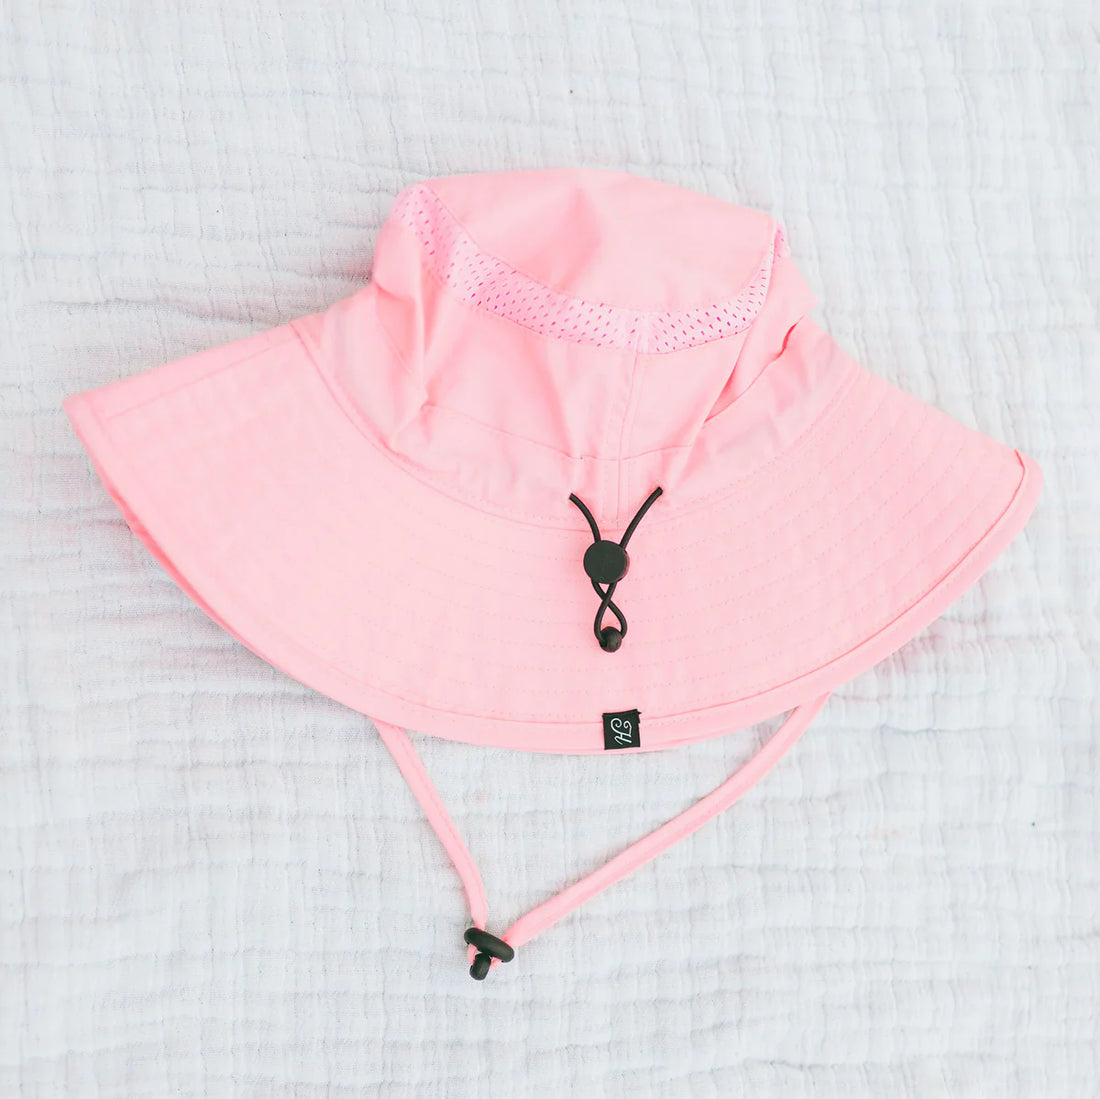 Honeysuckle Swim Co - Bucket Sunhat (Pink) $15 sale - discount applied at checkout